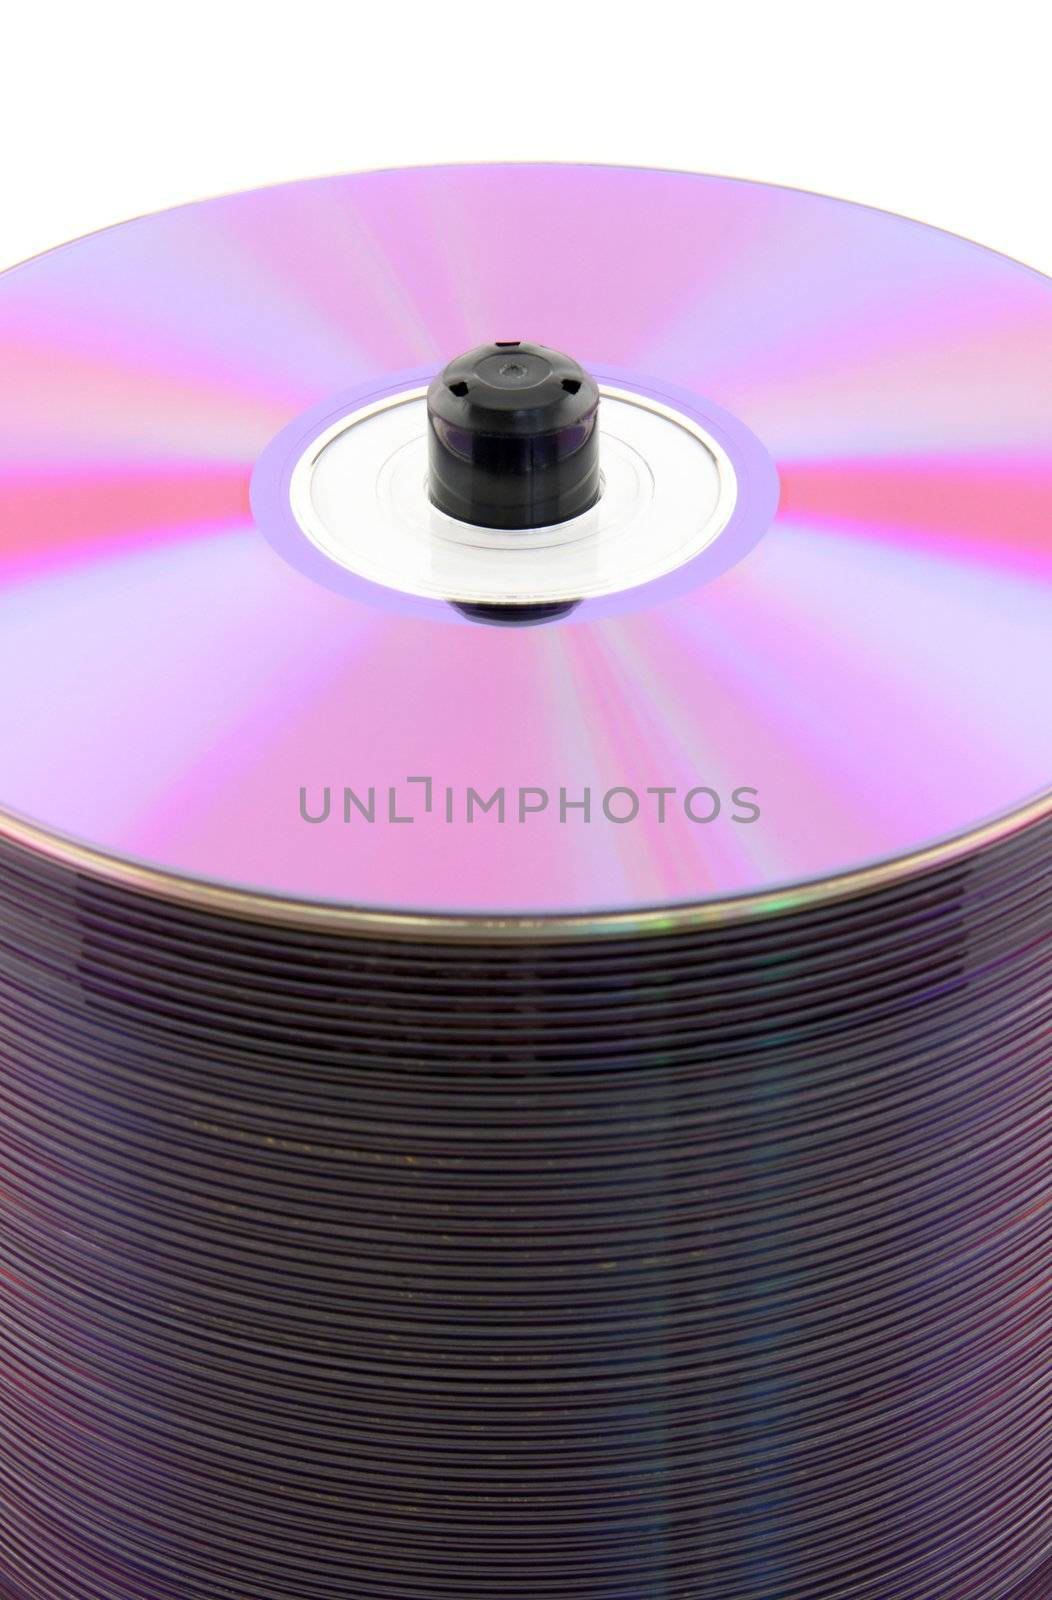 Purple CDs or DVDs on spindle, on white background. No dust.